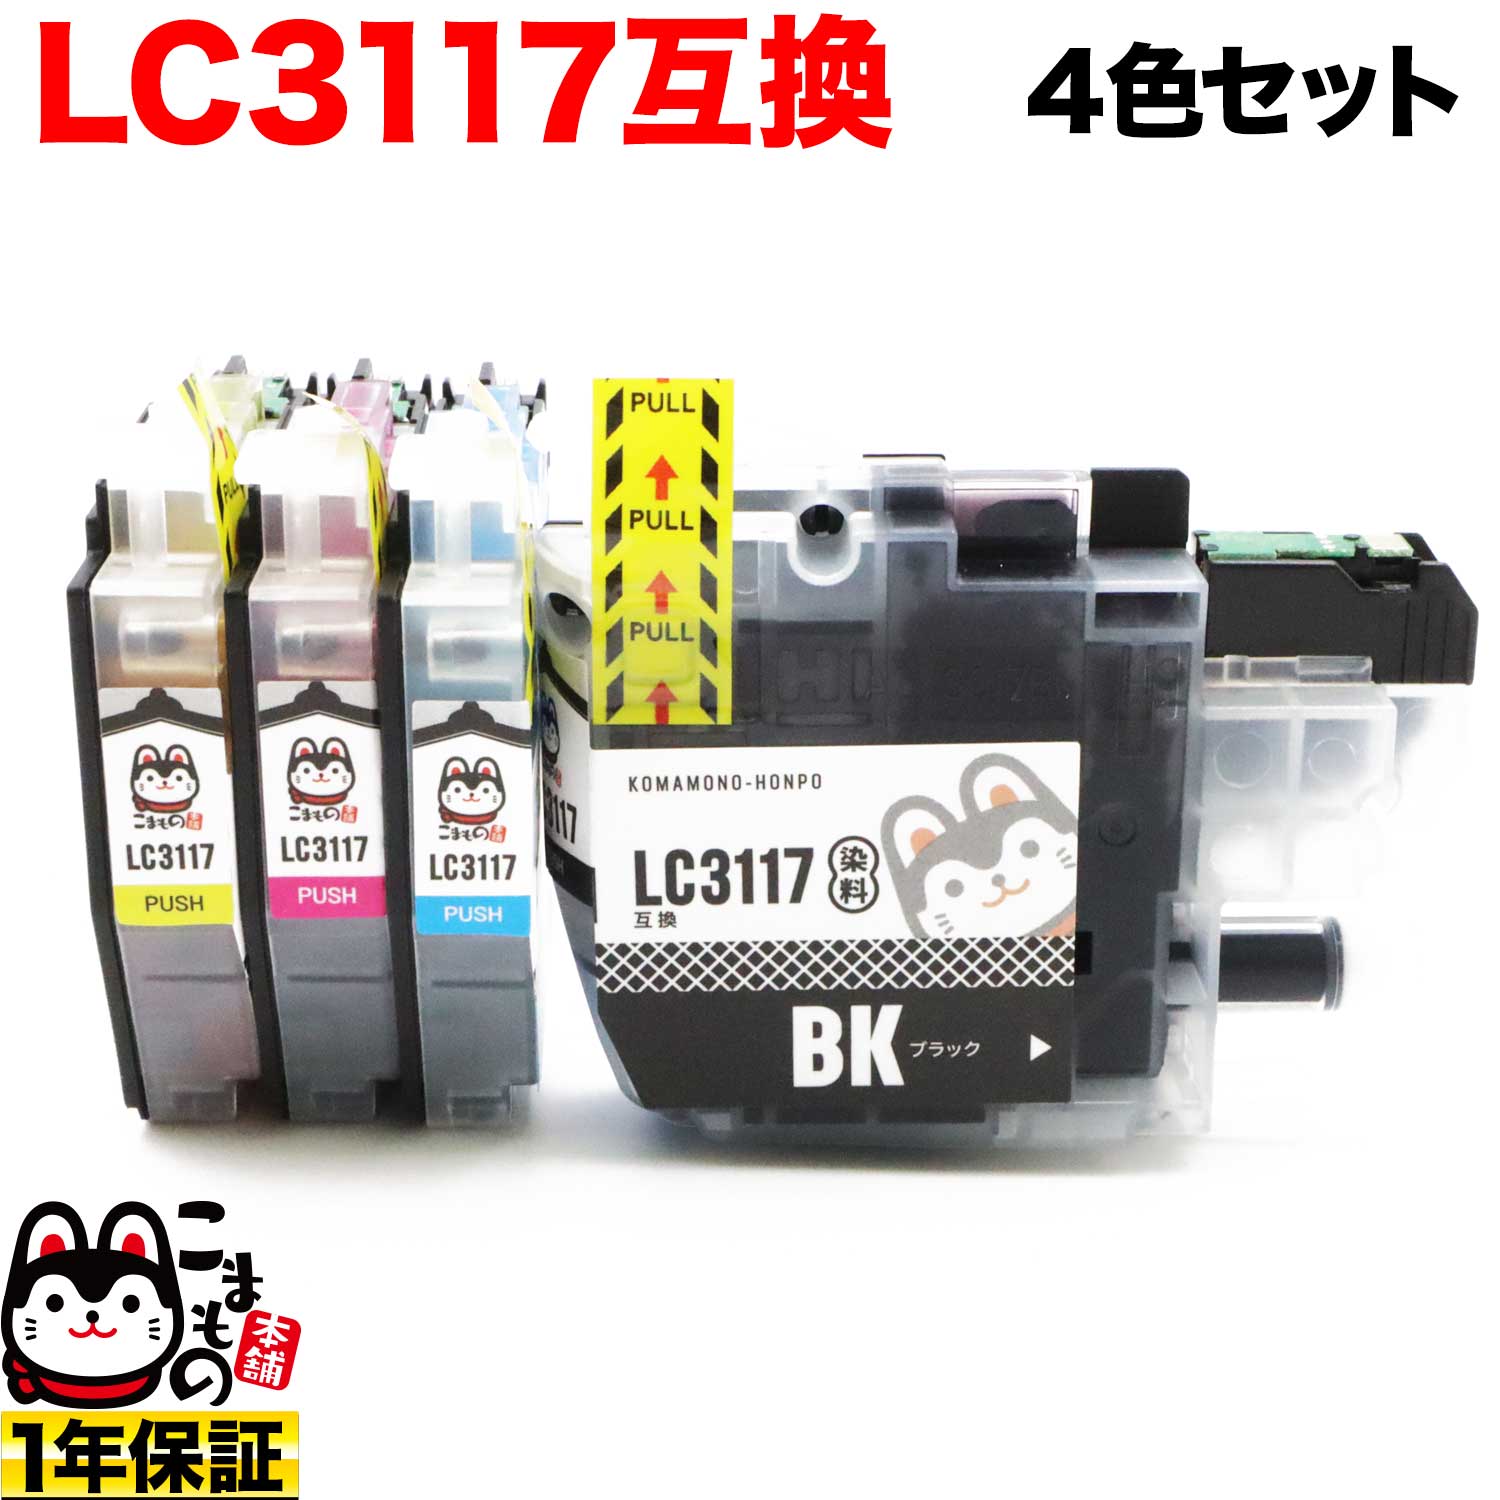 brother LC3117 (各色単品純正インク 4色セット)